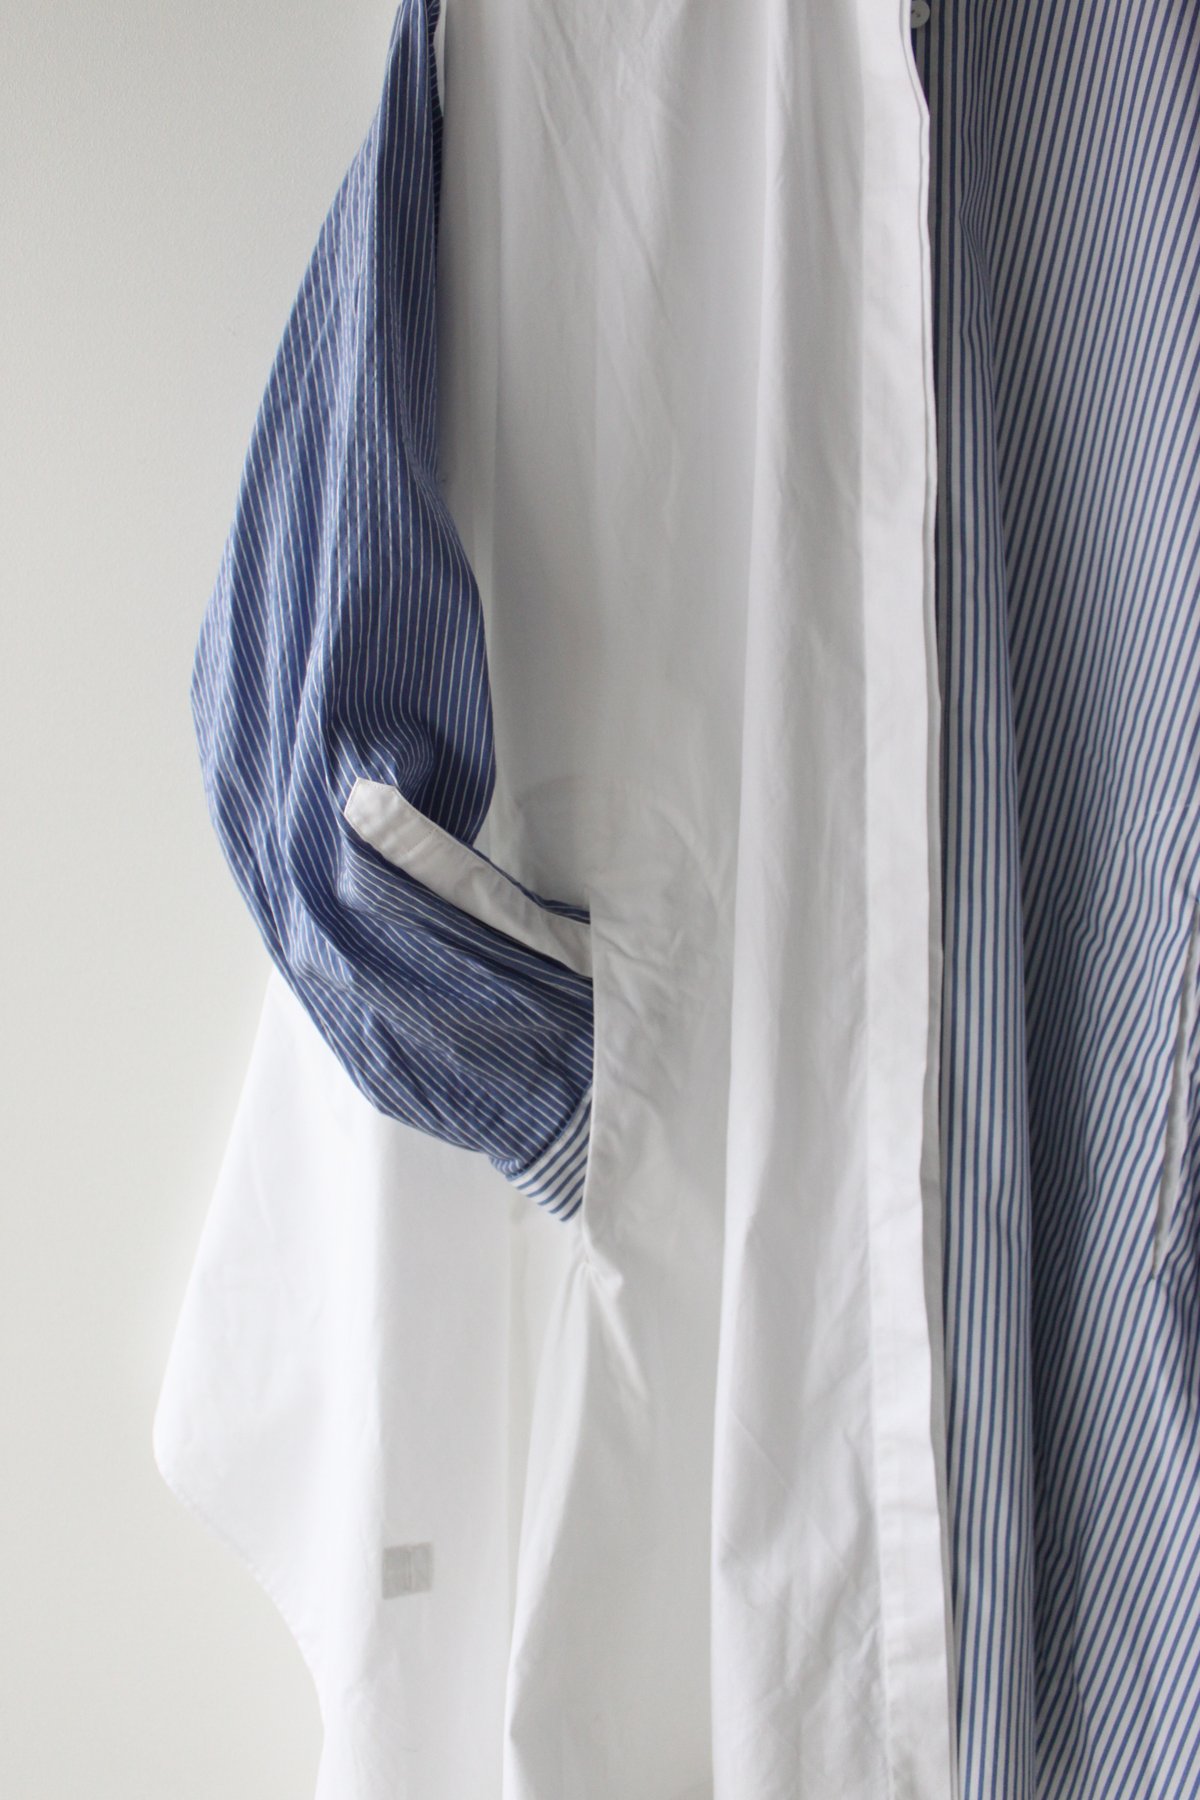 Archive- Patch work apron style shirt